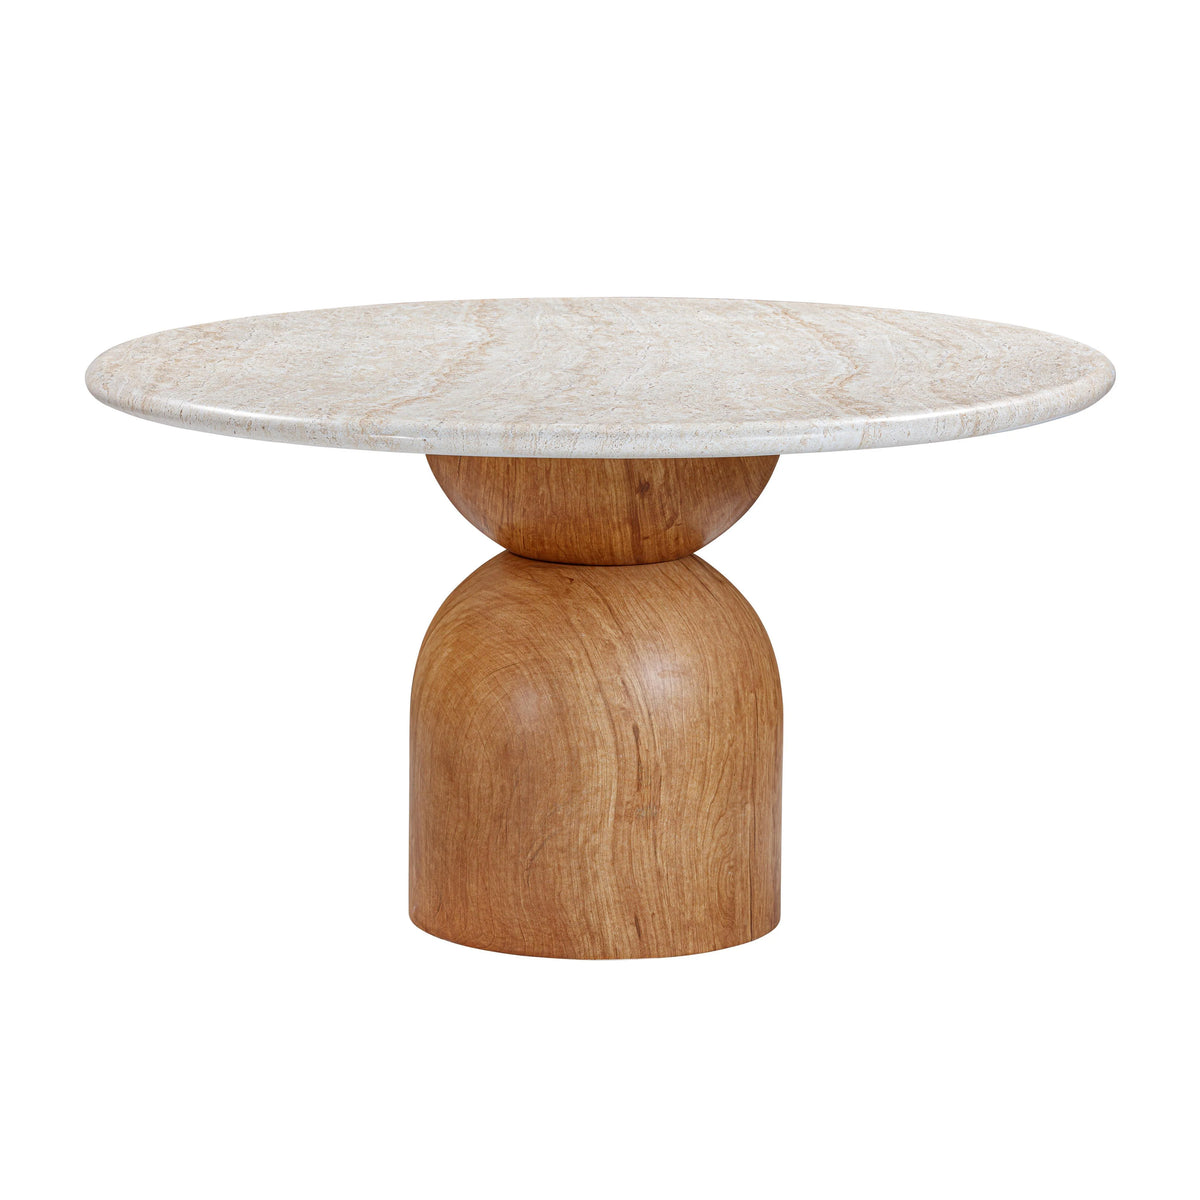 Taylor Travertine Concrete Indoor / Outdoor 54" Round Dining Table